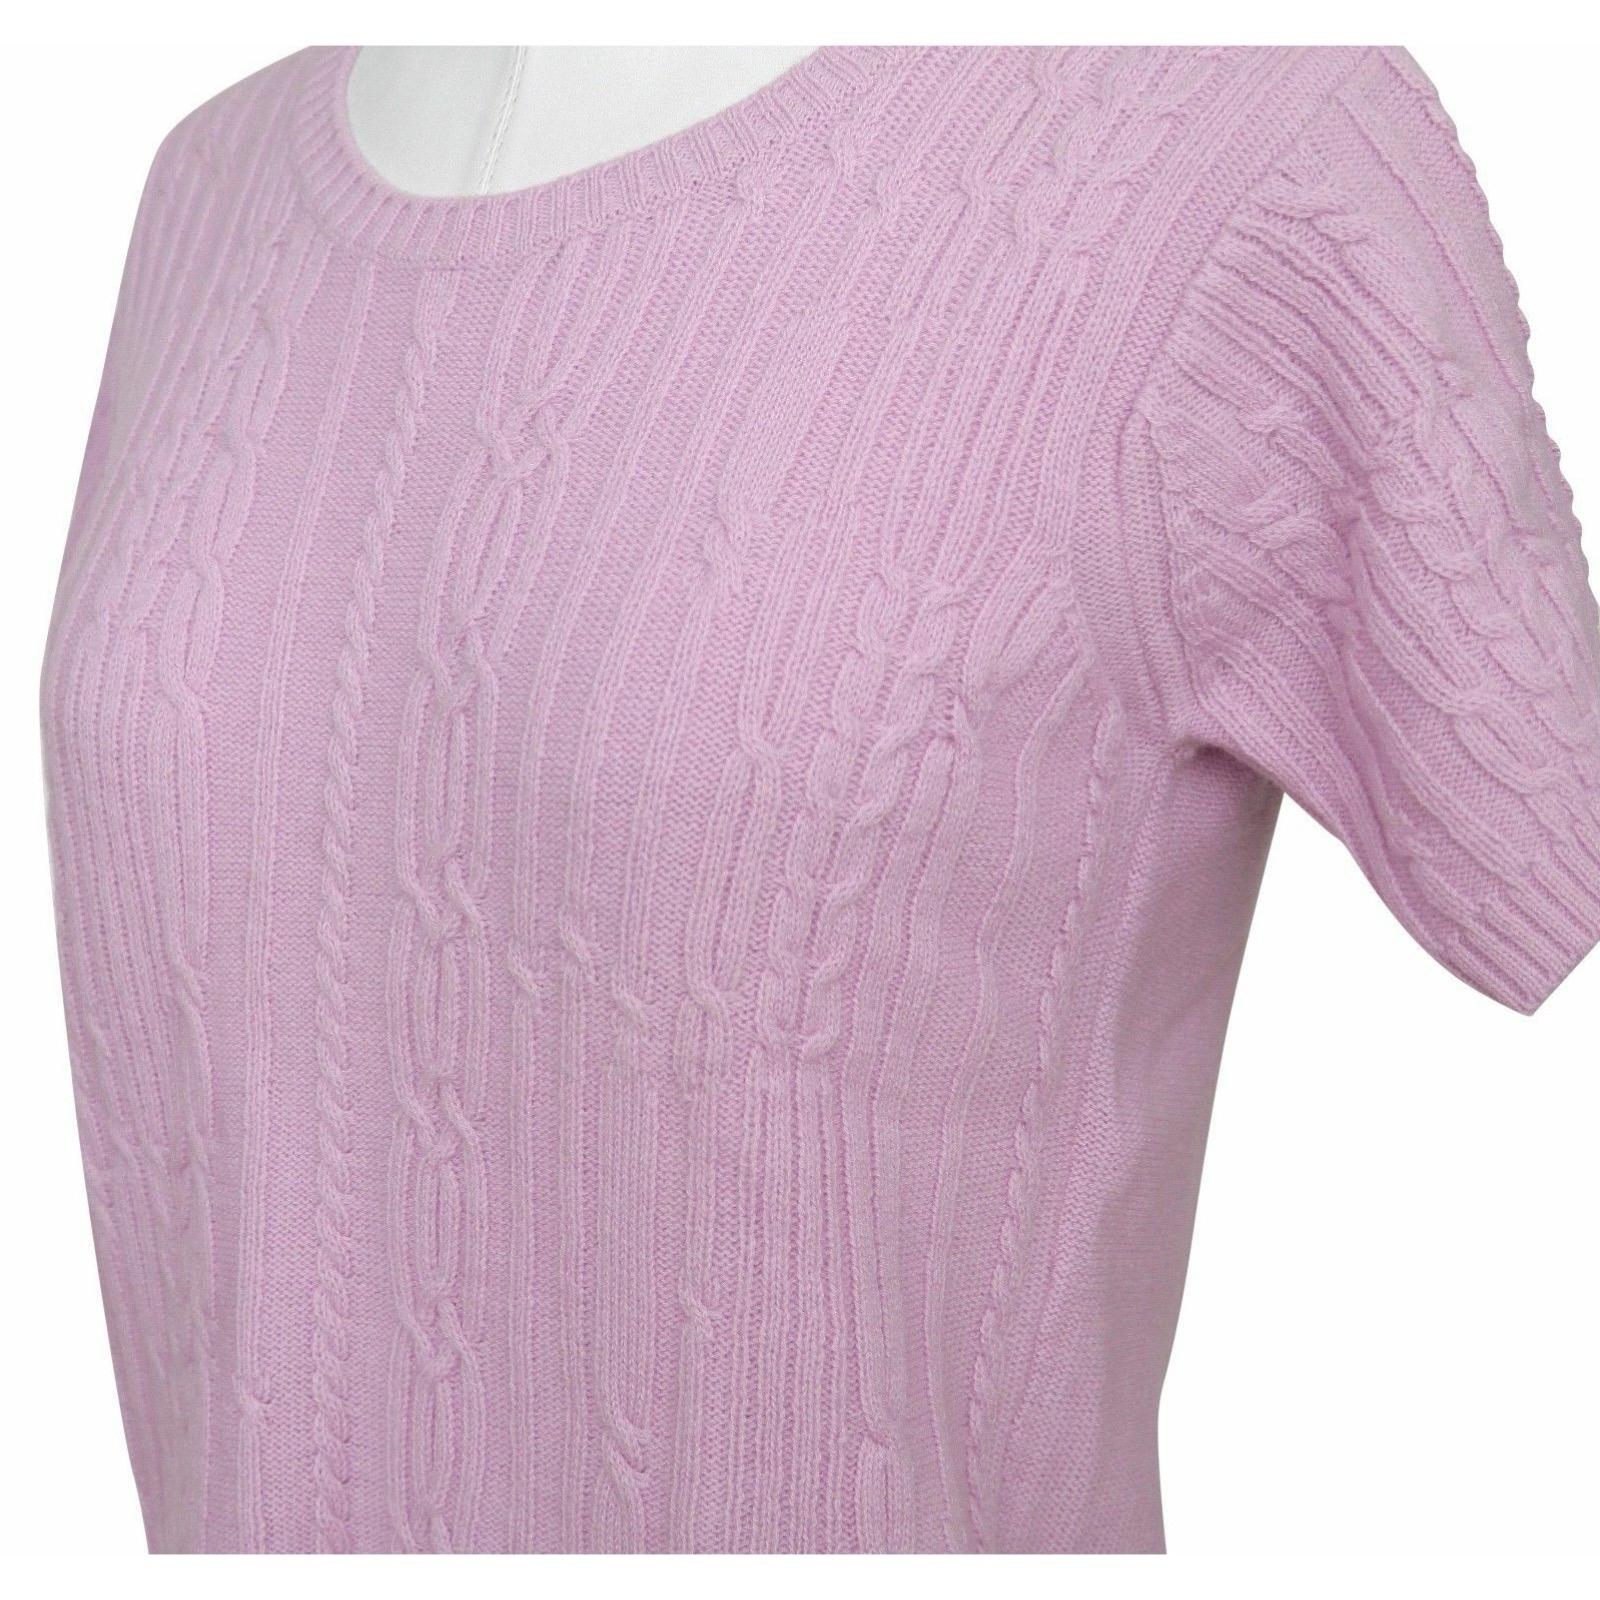 CHLOE Sweater Knit Short Sleeve Top Pink Crew Neck Wool Sz S For Sale 4